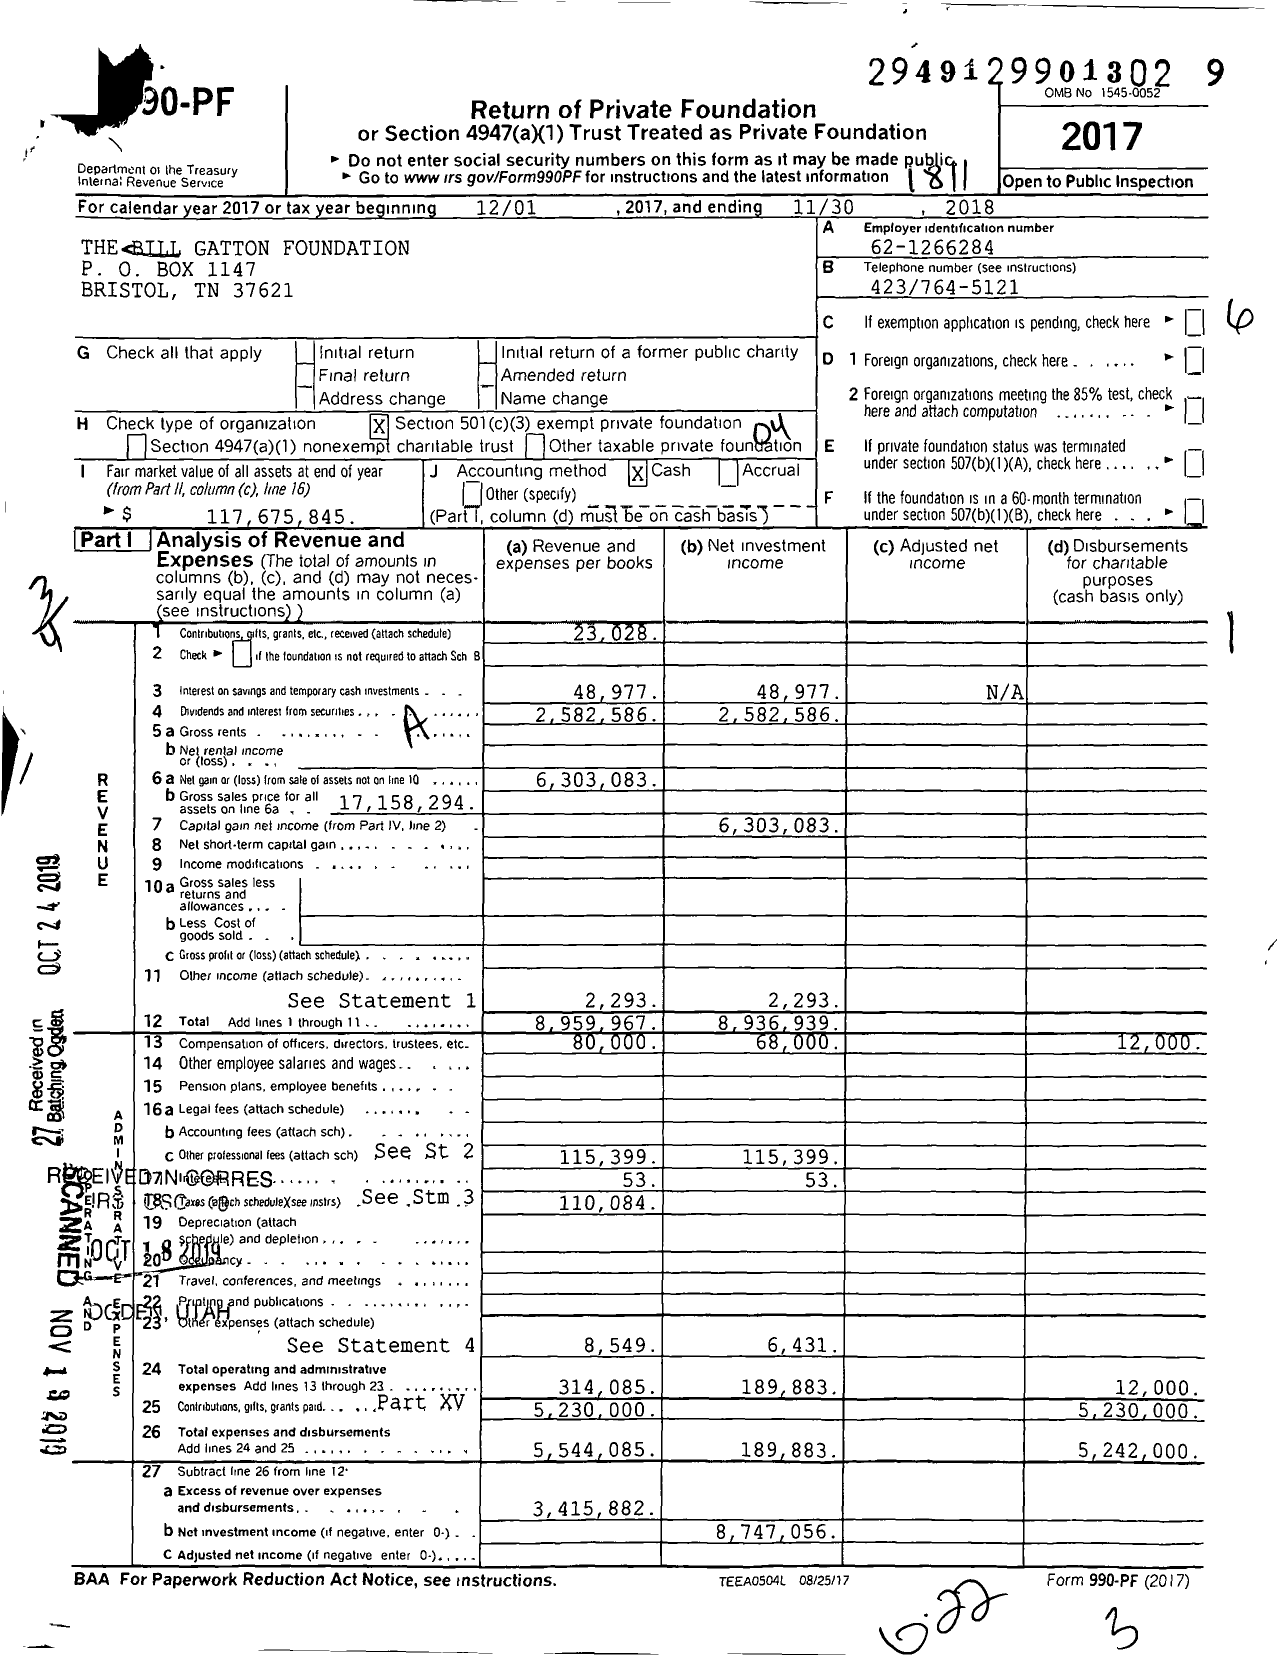 Image of first page of 2017 Form 990PF for The Bill Gatton Foundation